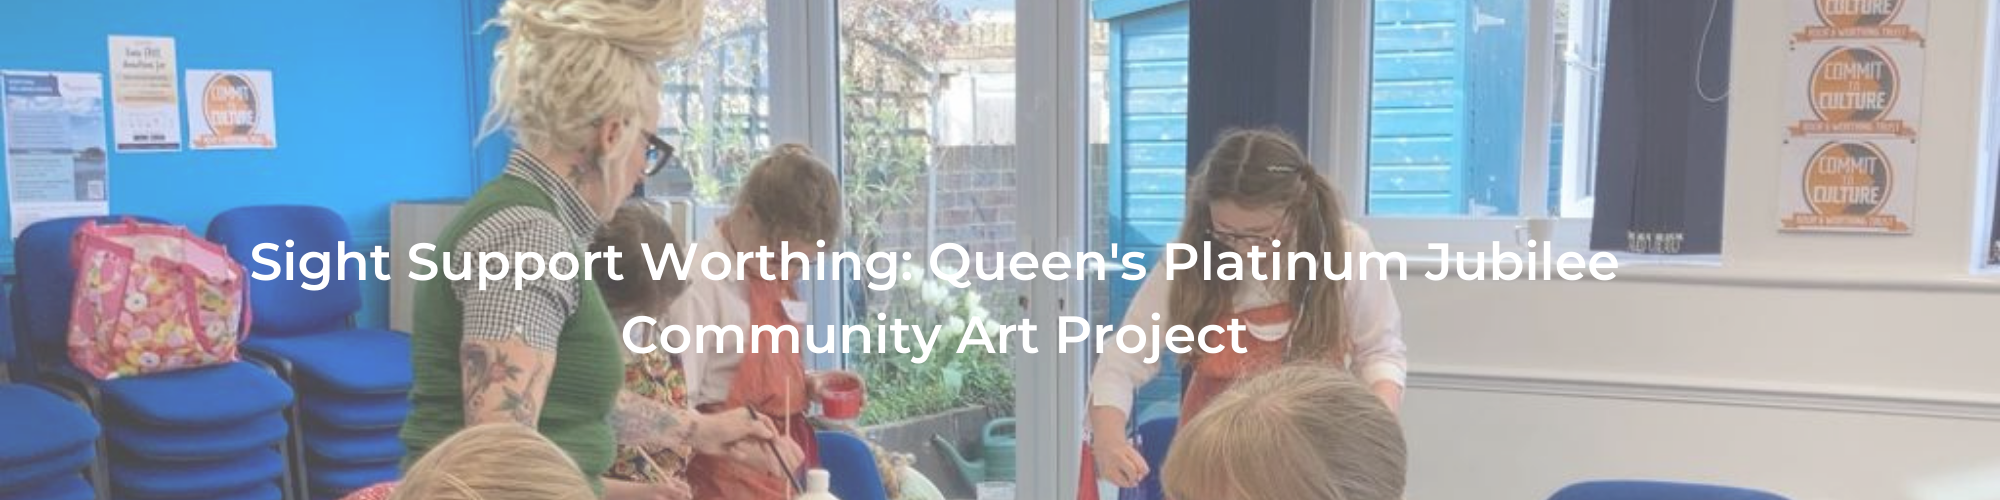 Sight Support Worthing: Queen's Platinum Jubilee Community Art Project